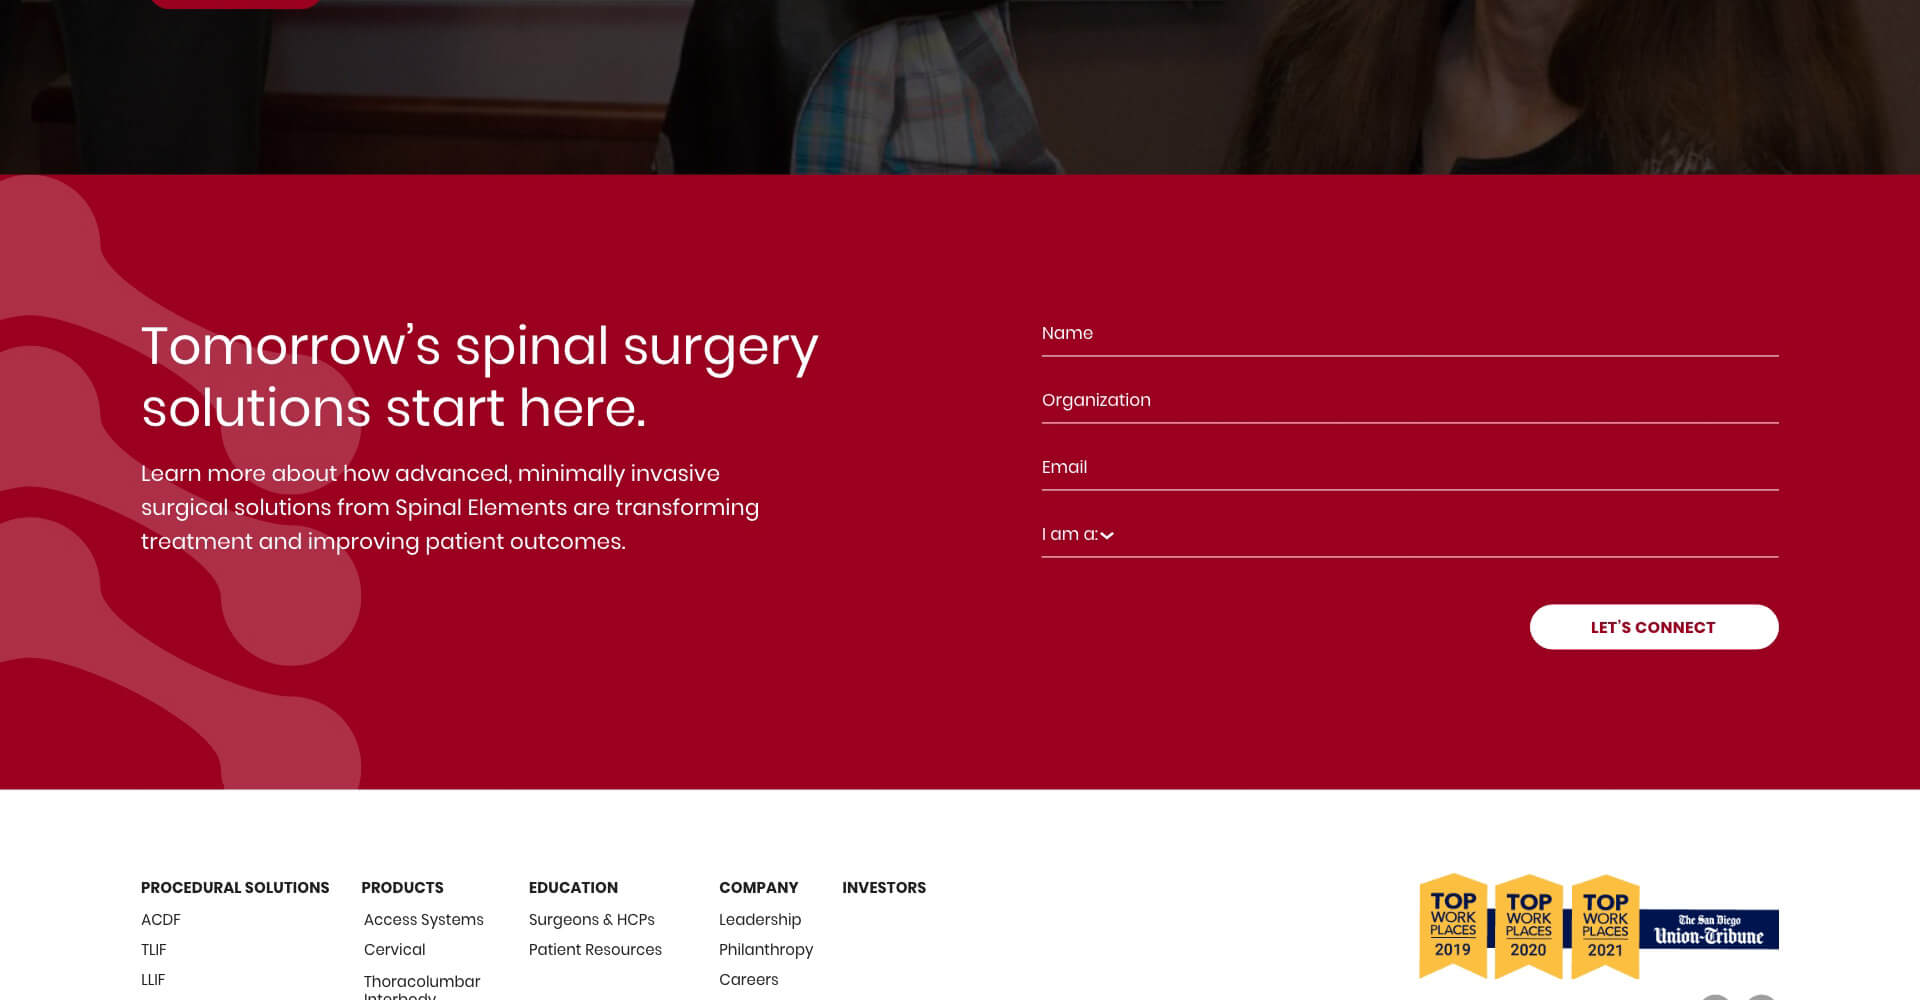 Homepage screenshot of Spinal Elements